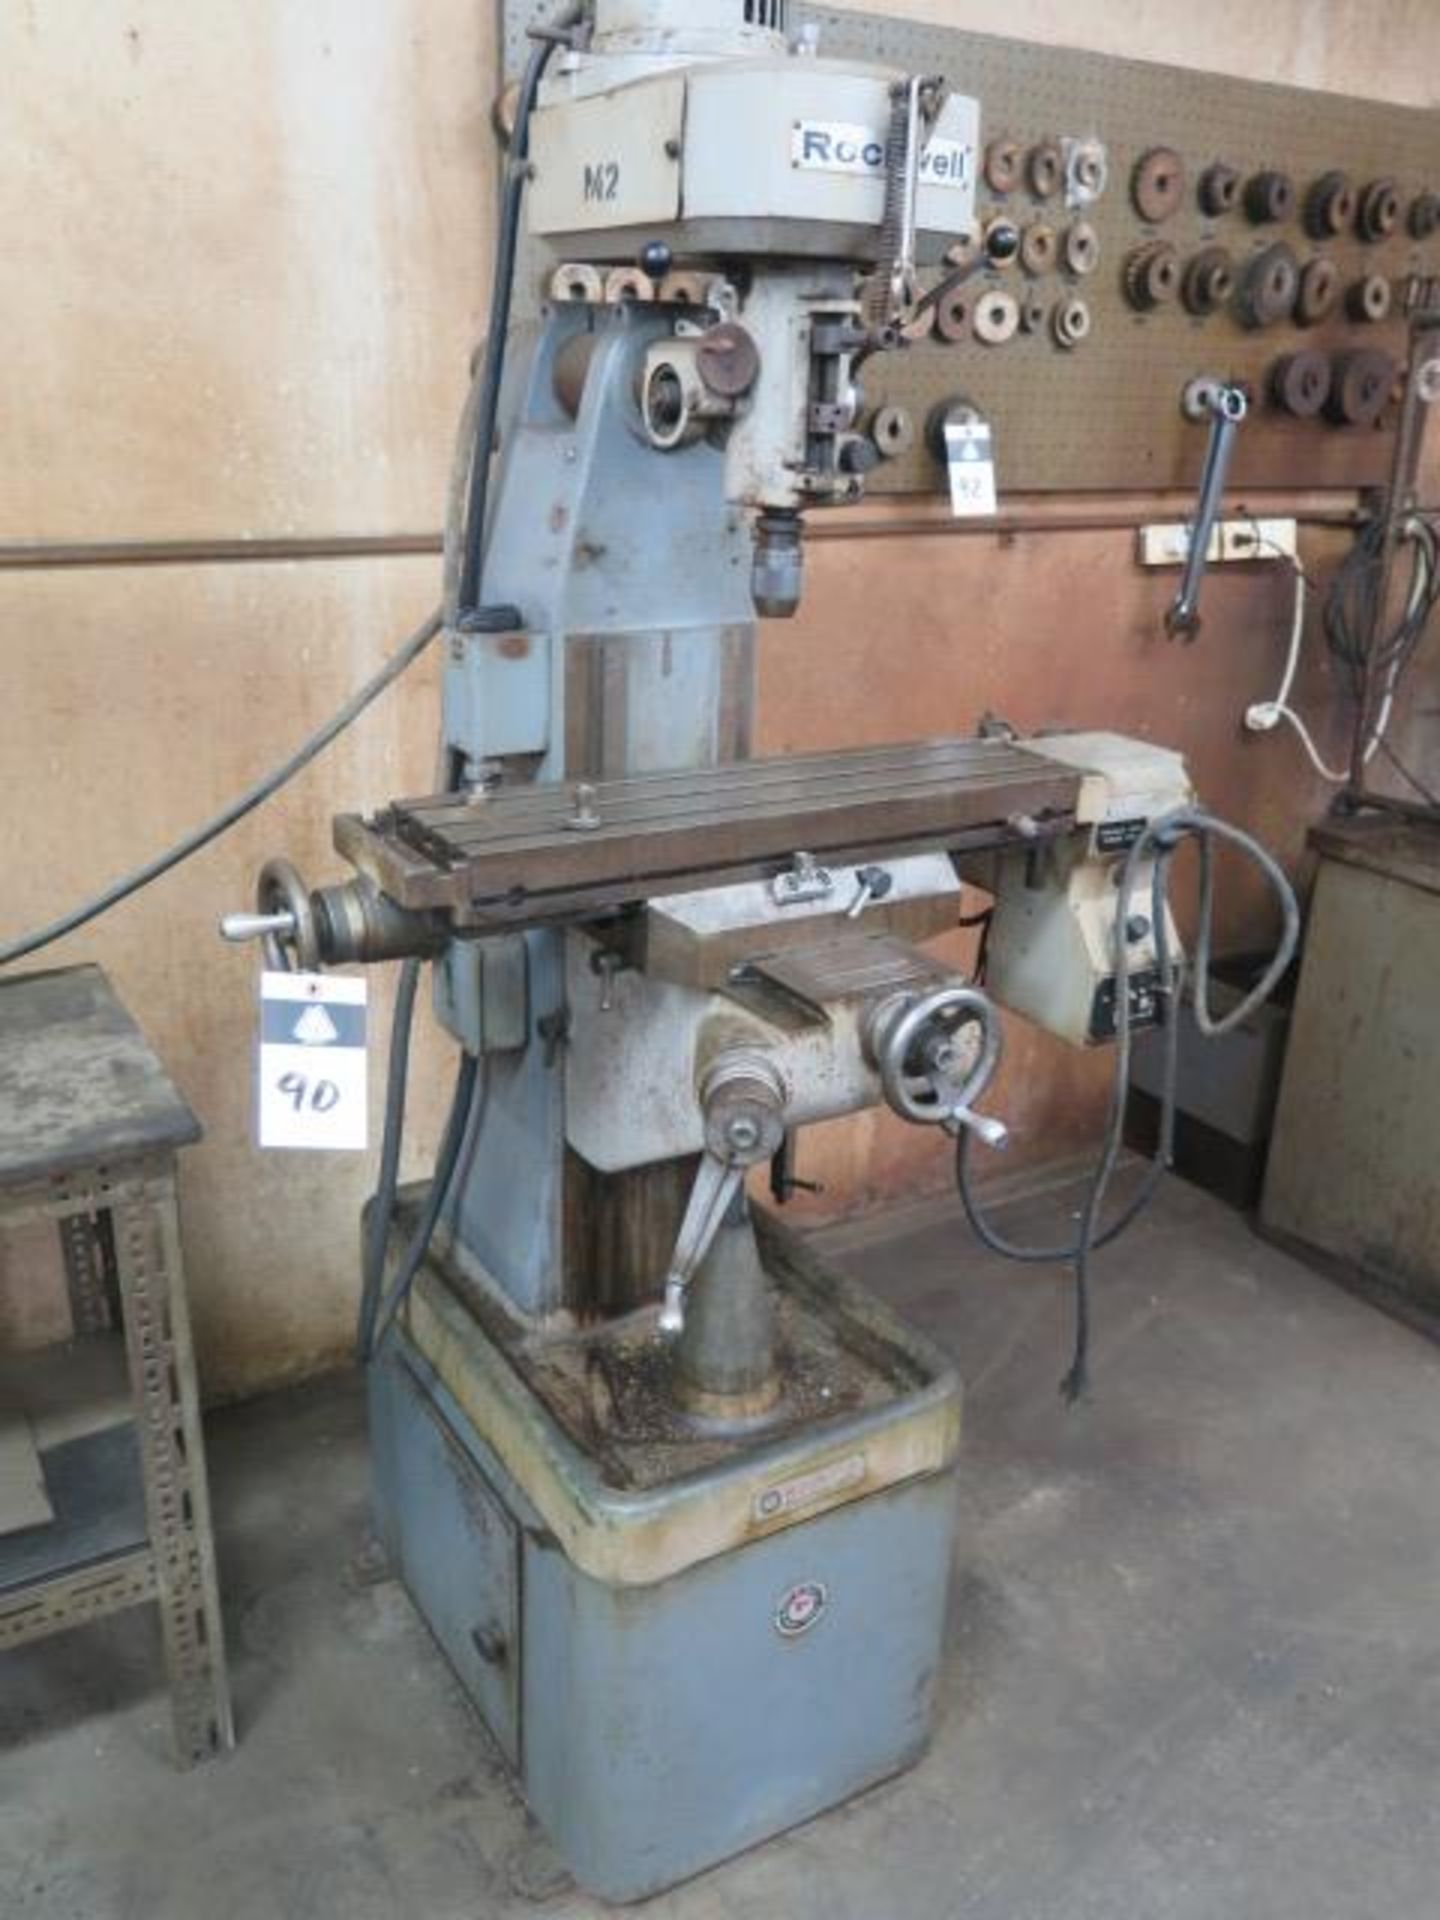 Rockwell Ram Style Vertical Mill w/ 370-6300 RPM, 6-Speeds, R8 Spindle, Power Feed, SOLD AS IS